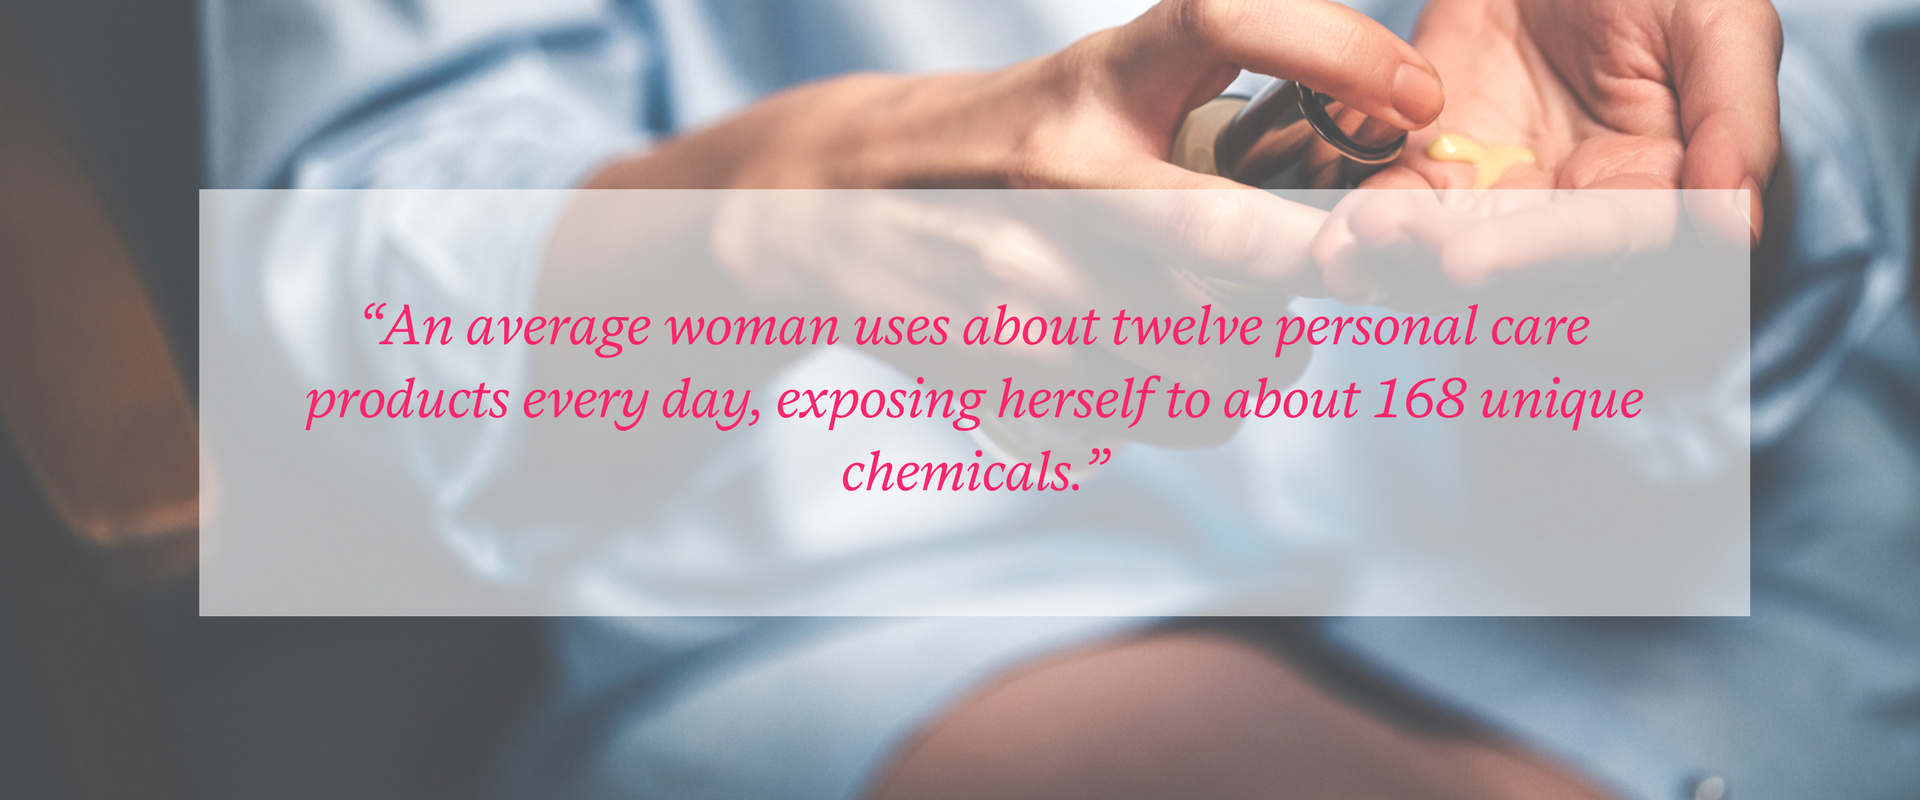 Avoid-Chemicals-Personal-Care-Pregnant